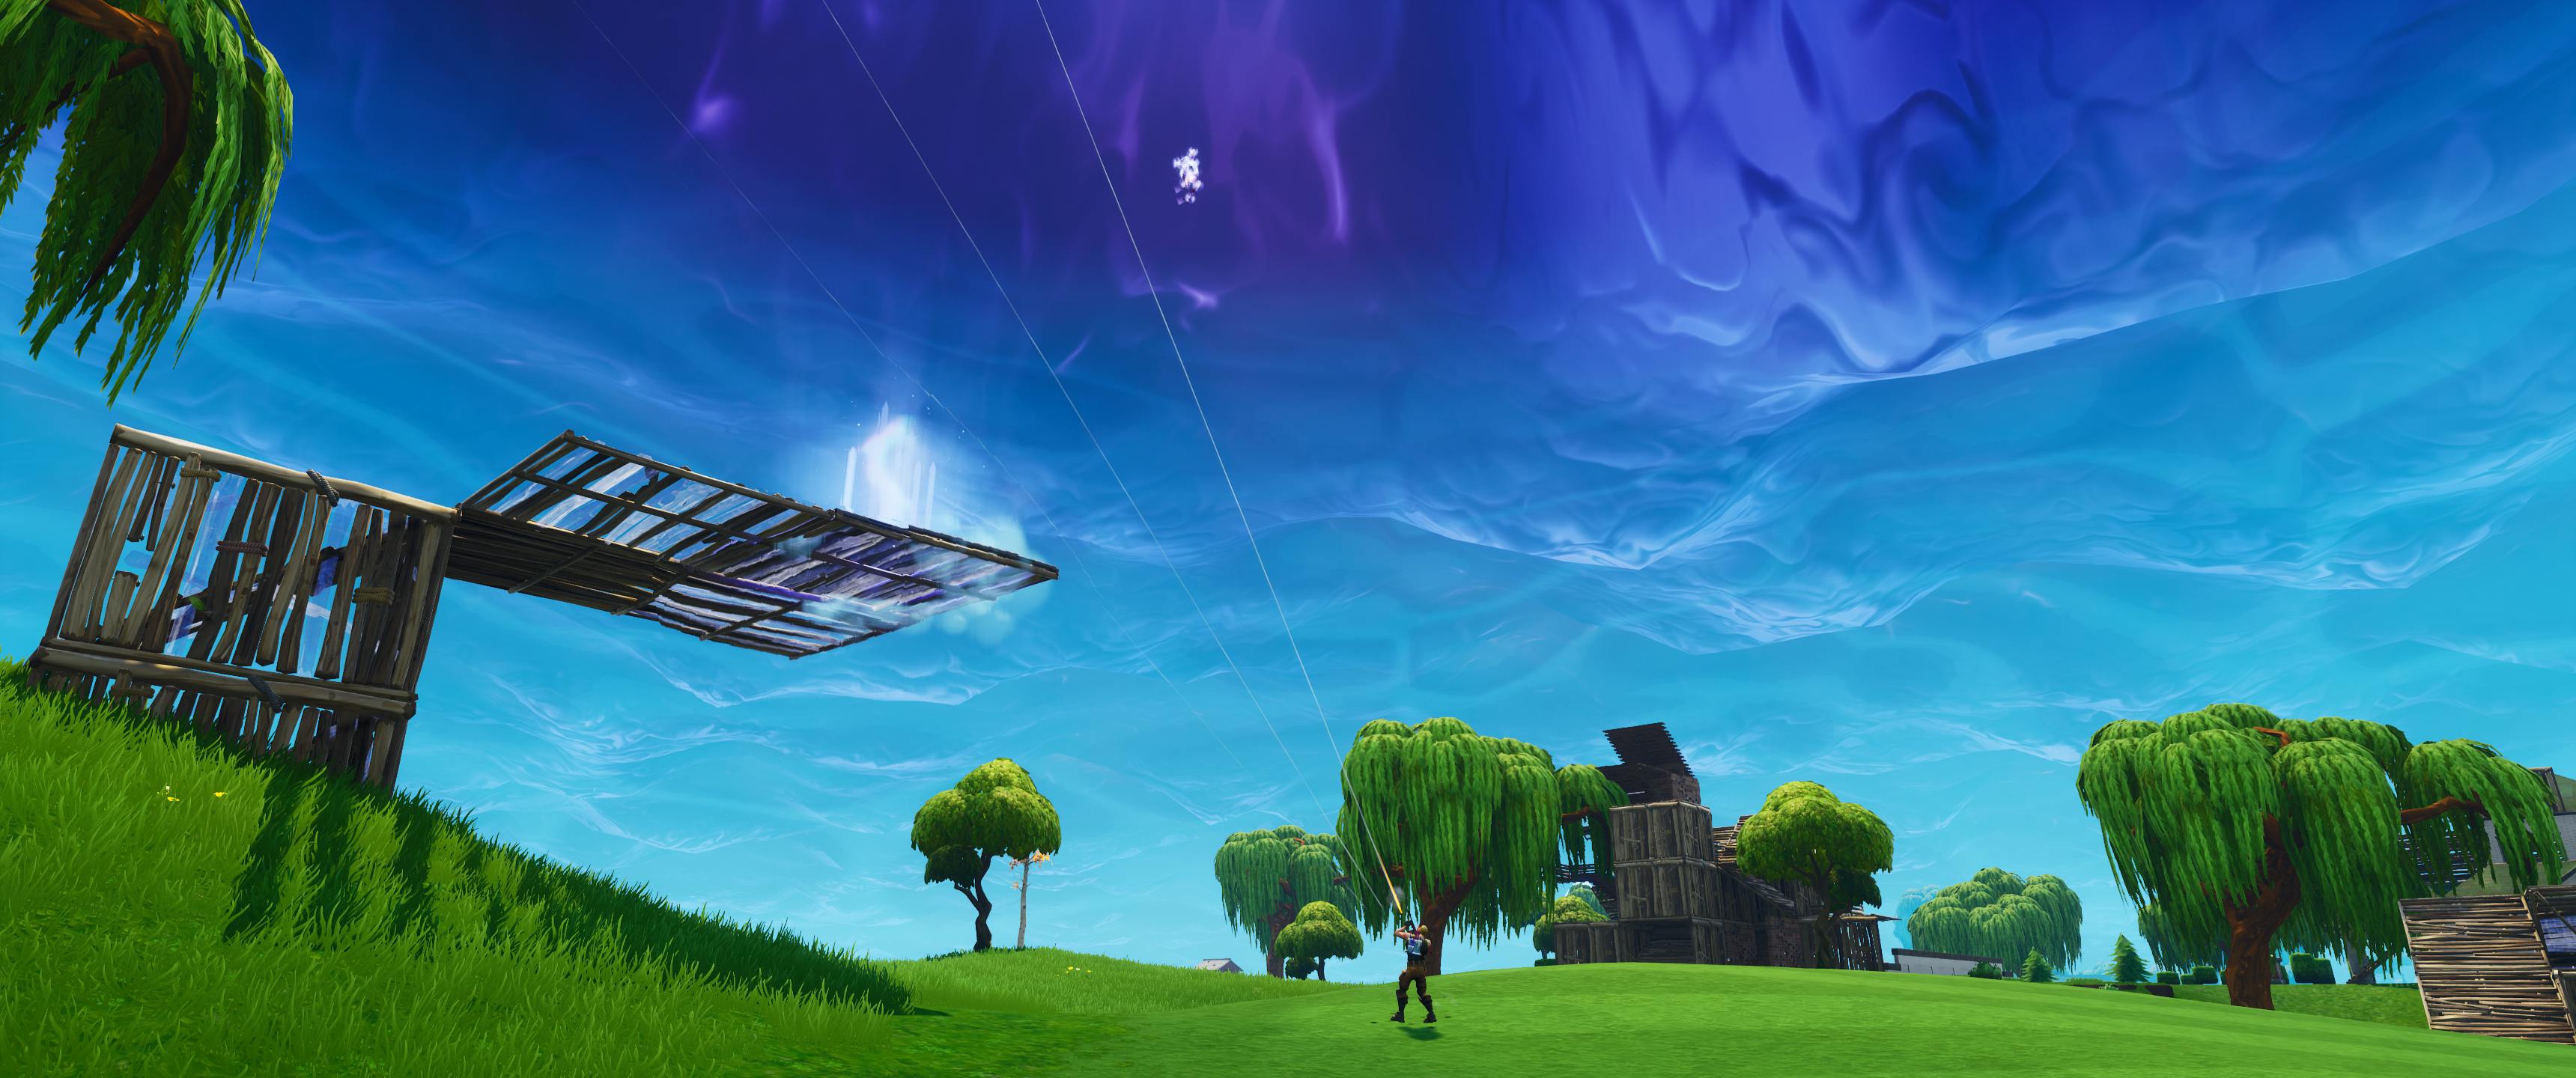 Free stock photo of Fornite, video games